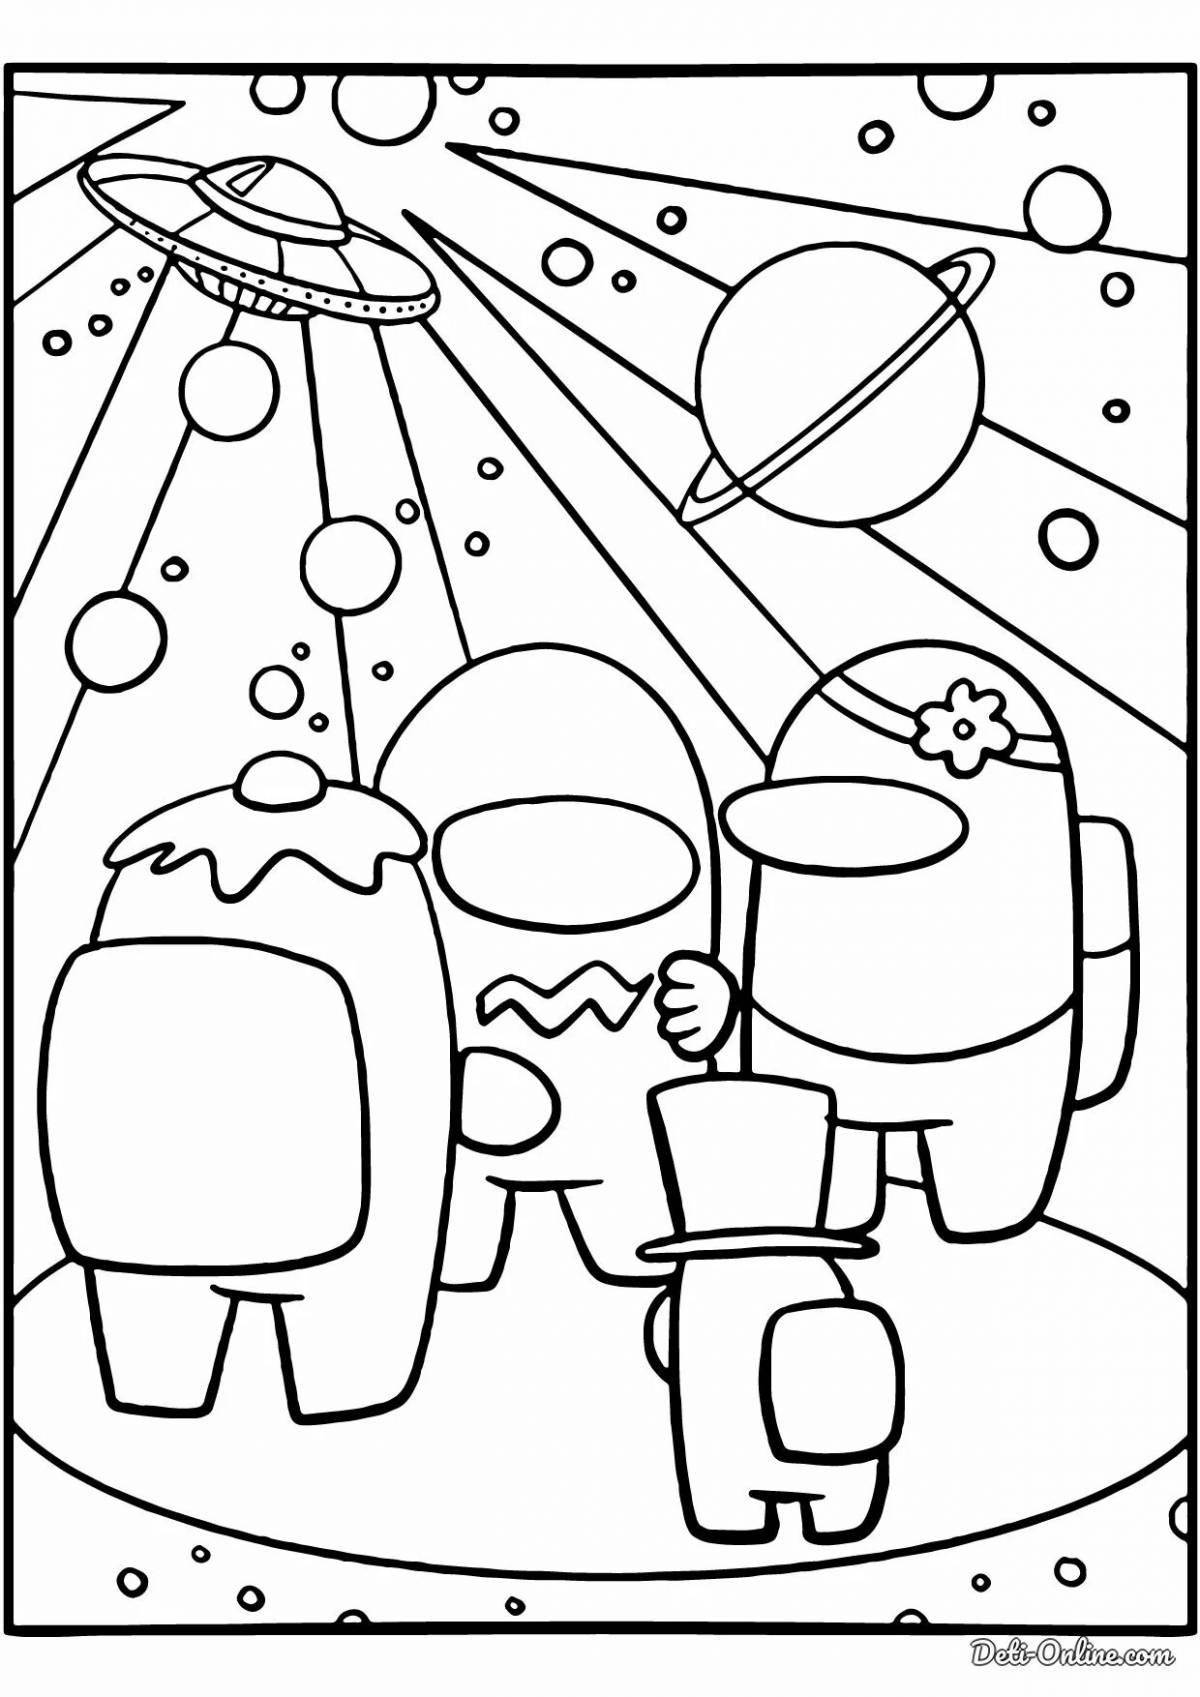 Fairy among us coloring pages for girls